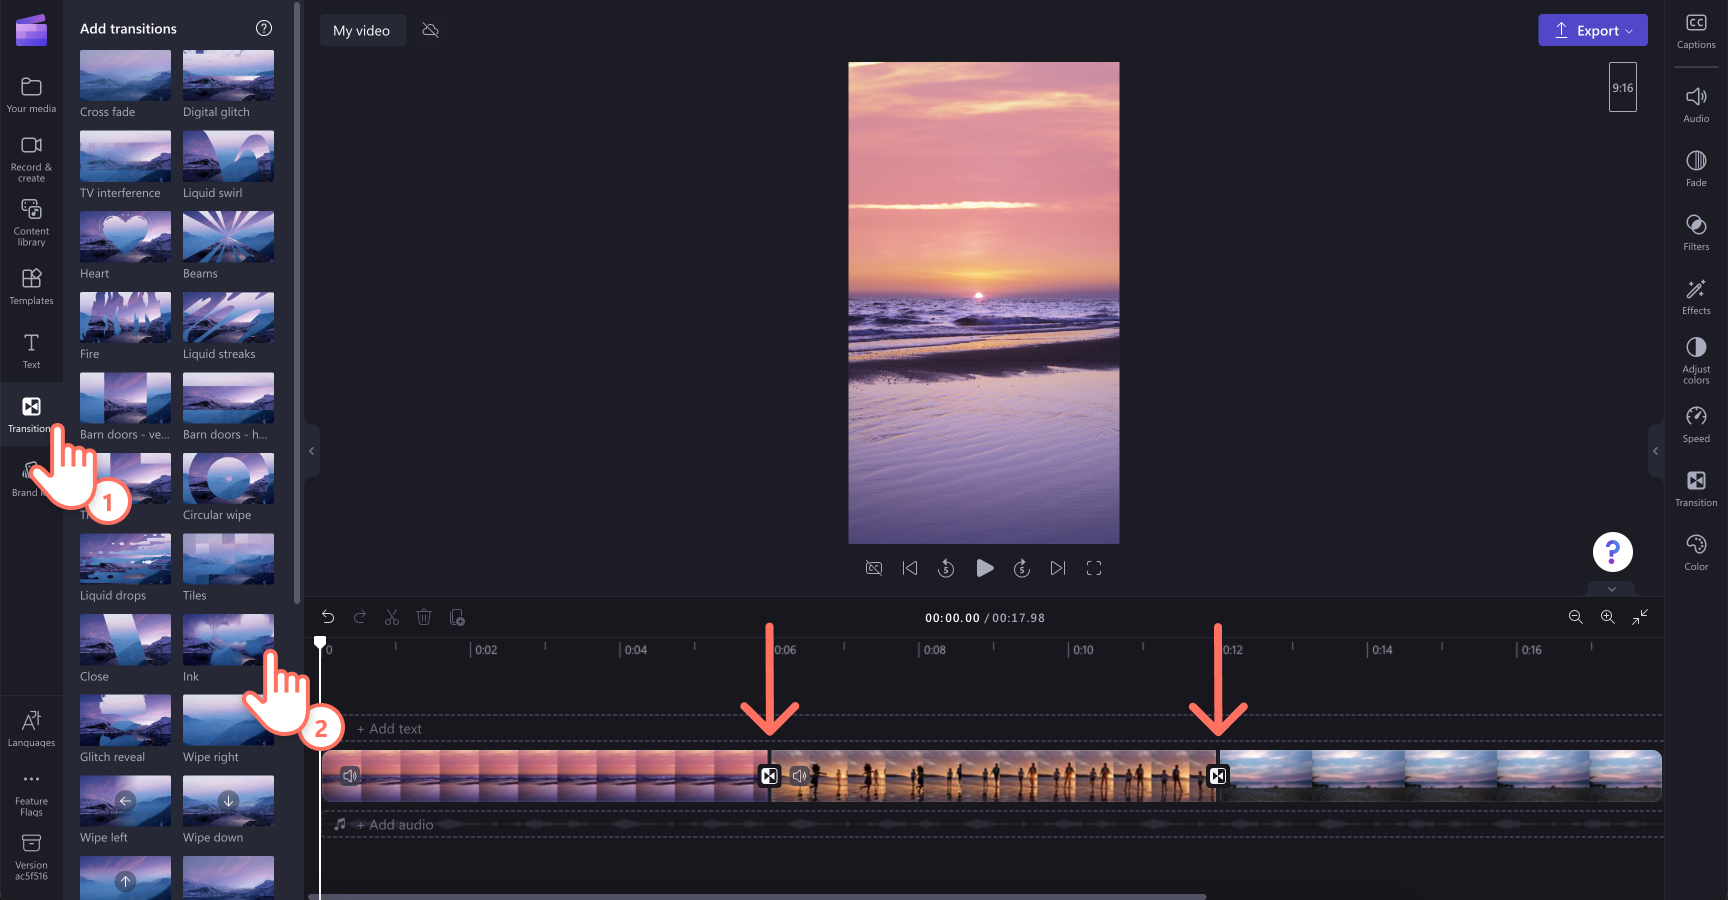 An image of a user adding transitions between videos on the timeline.